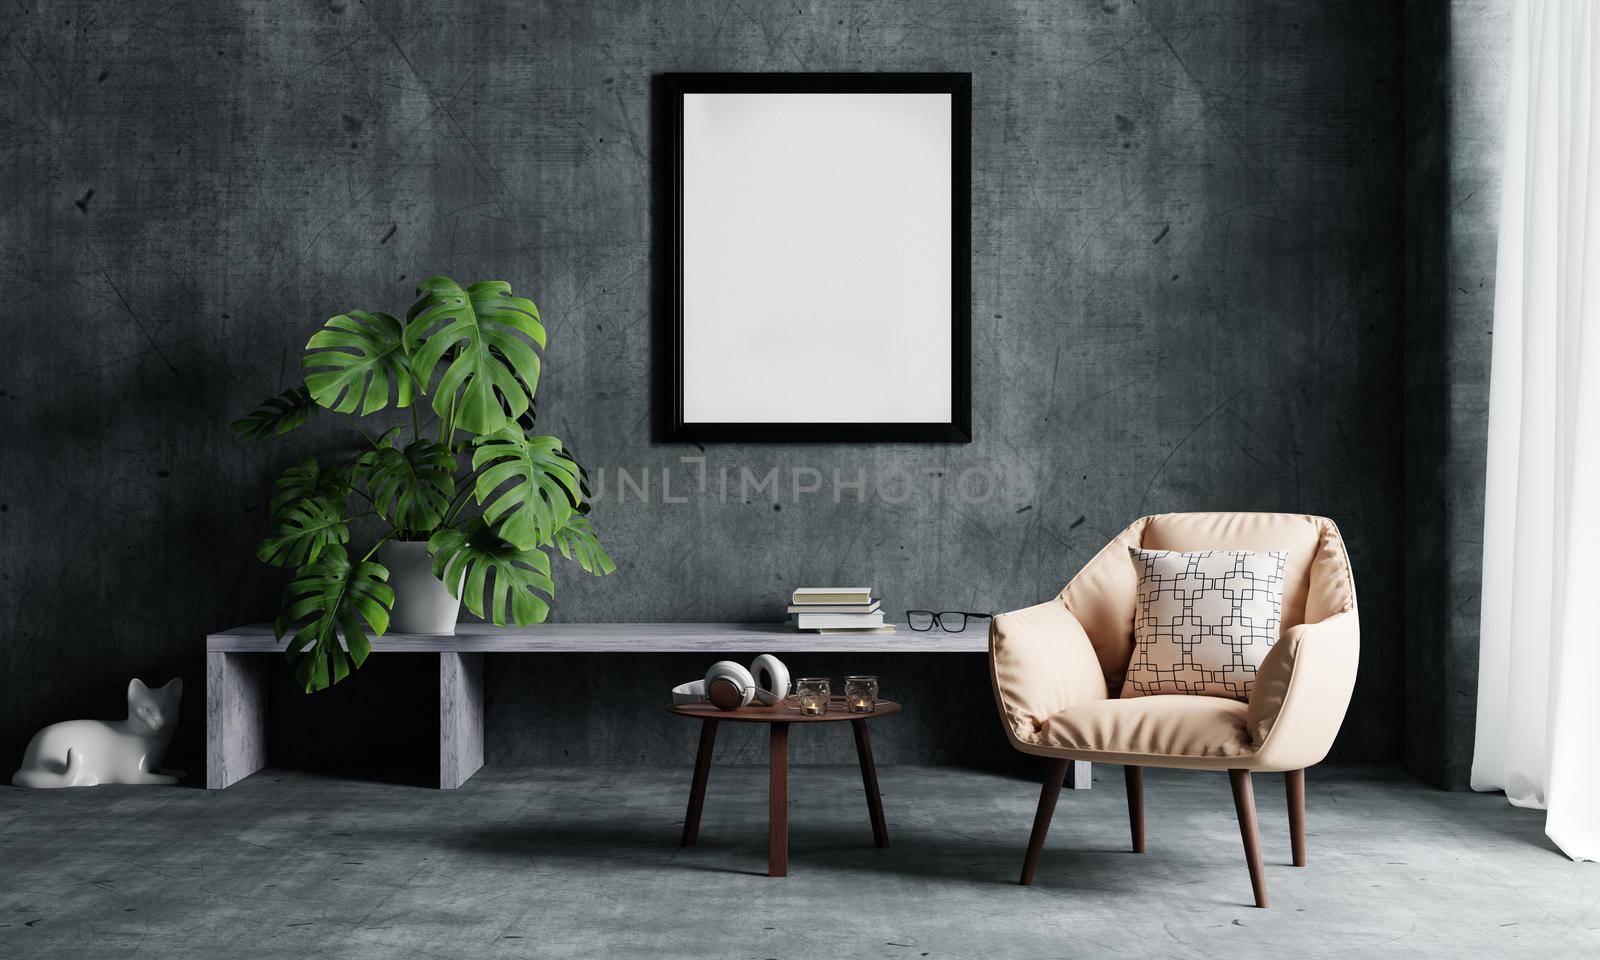 Living room with hanging white isolated empty mockup photo frame on loft wall background. Interior and architecture concept. 3D illustration rendering by MiniStocker